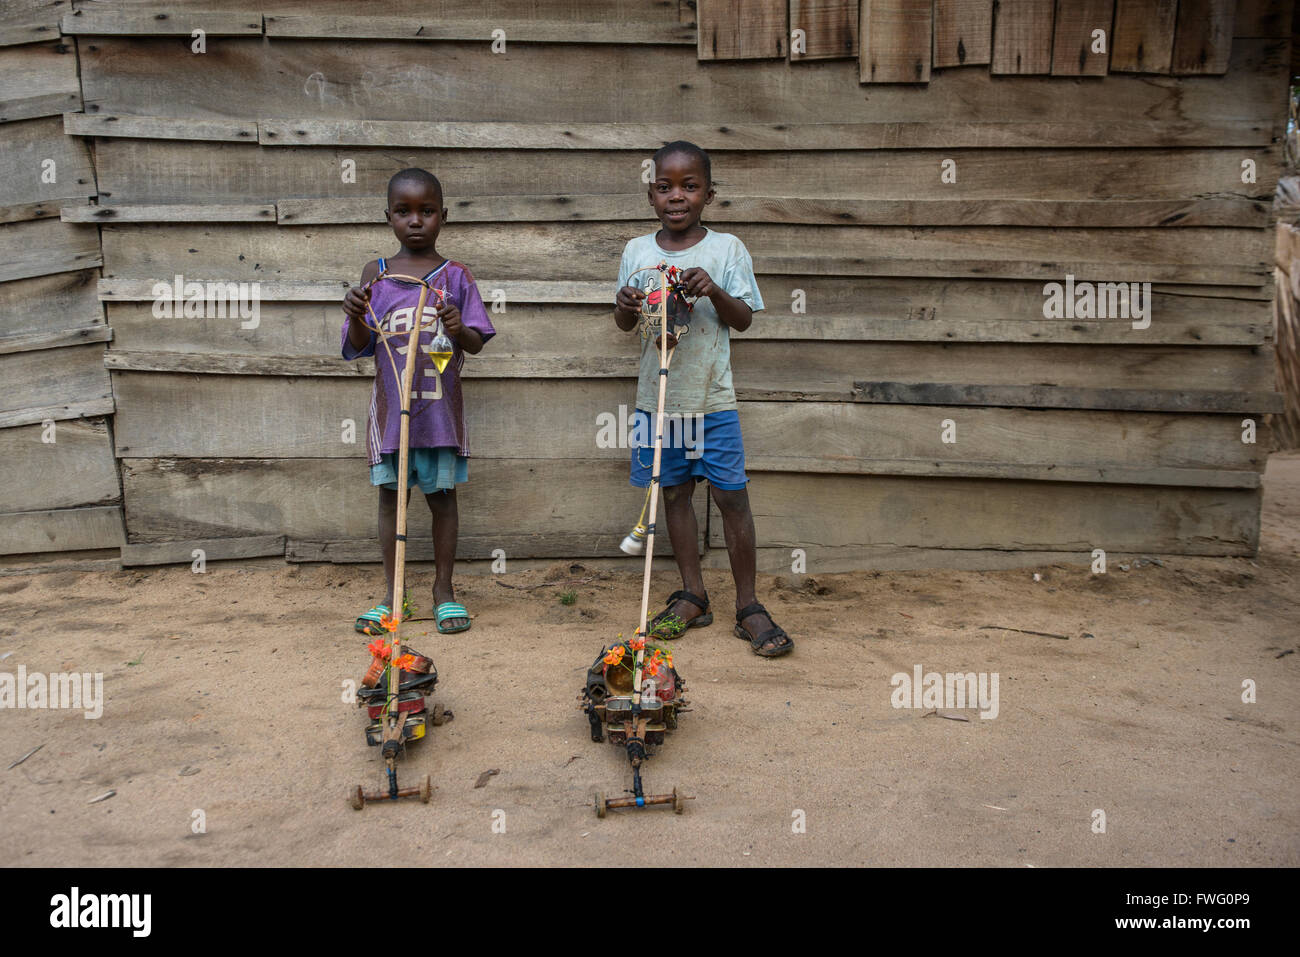 Bantu kids and toys made in Africa, Bayanga, Central African republic Stock Photo